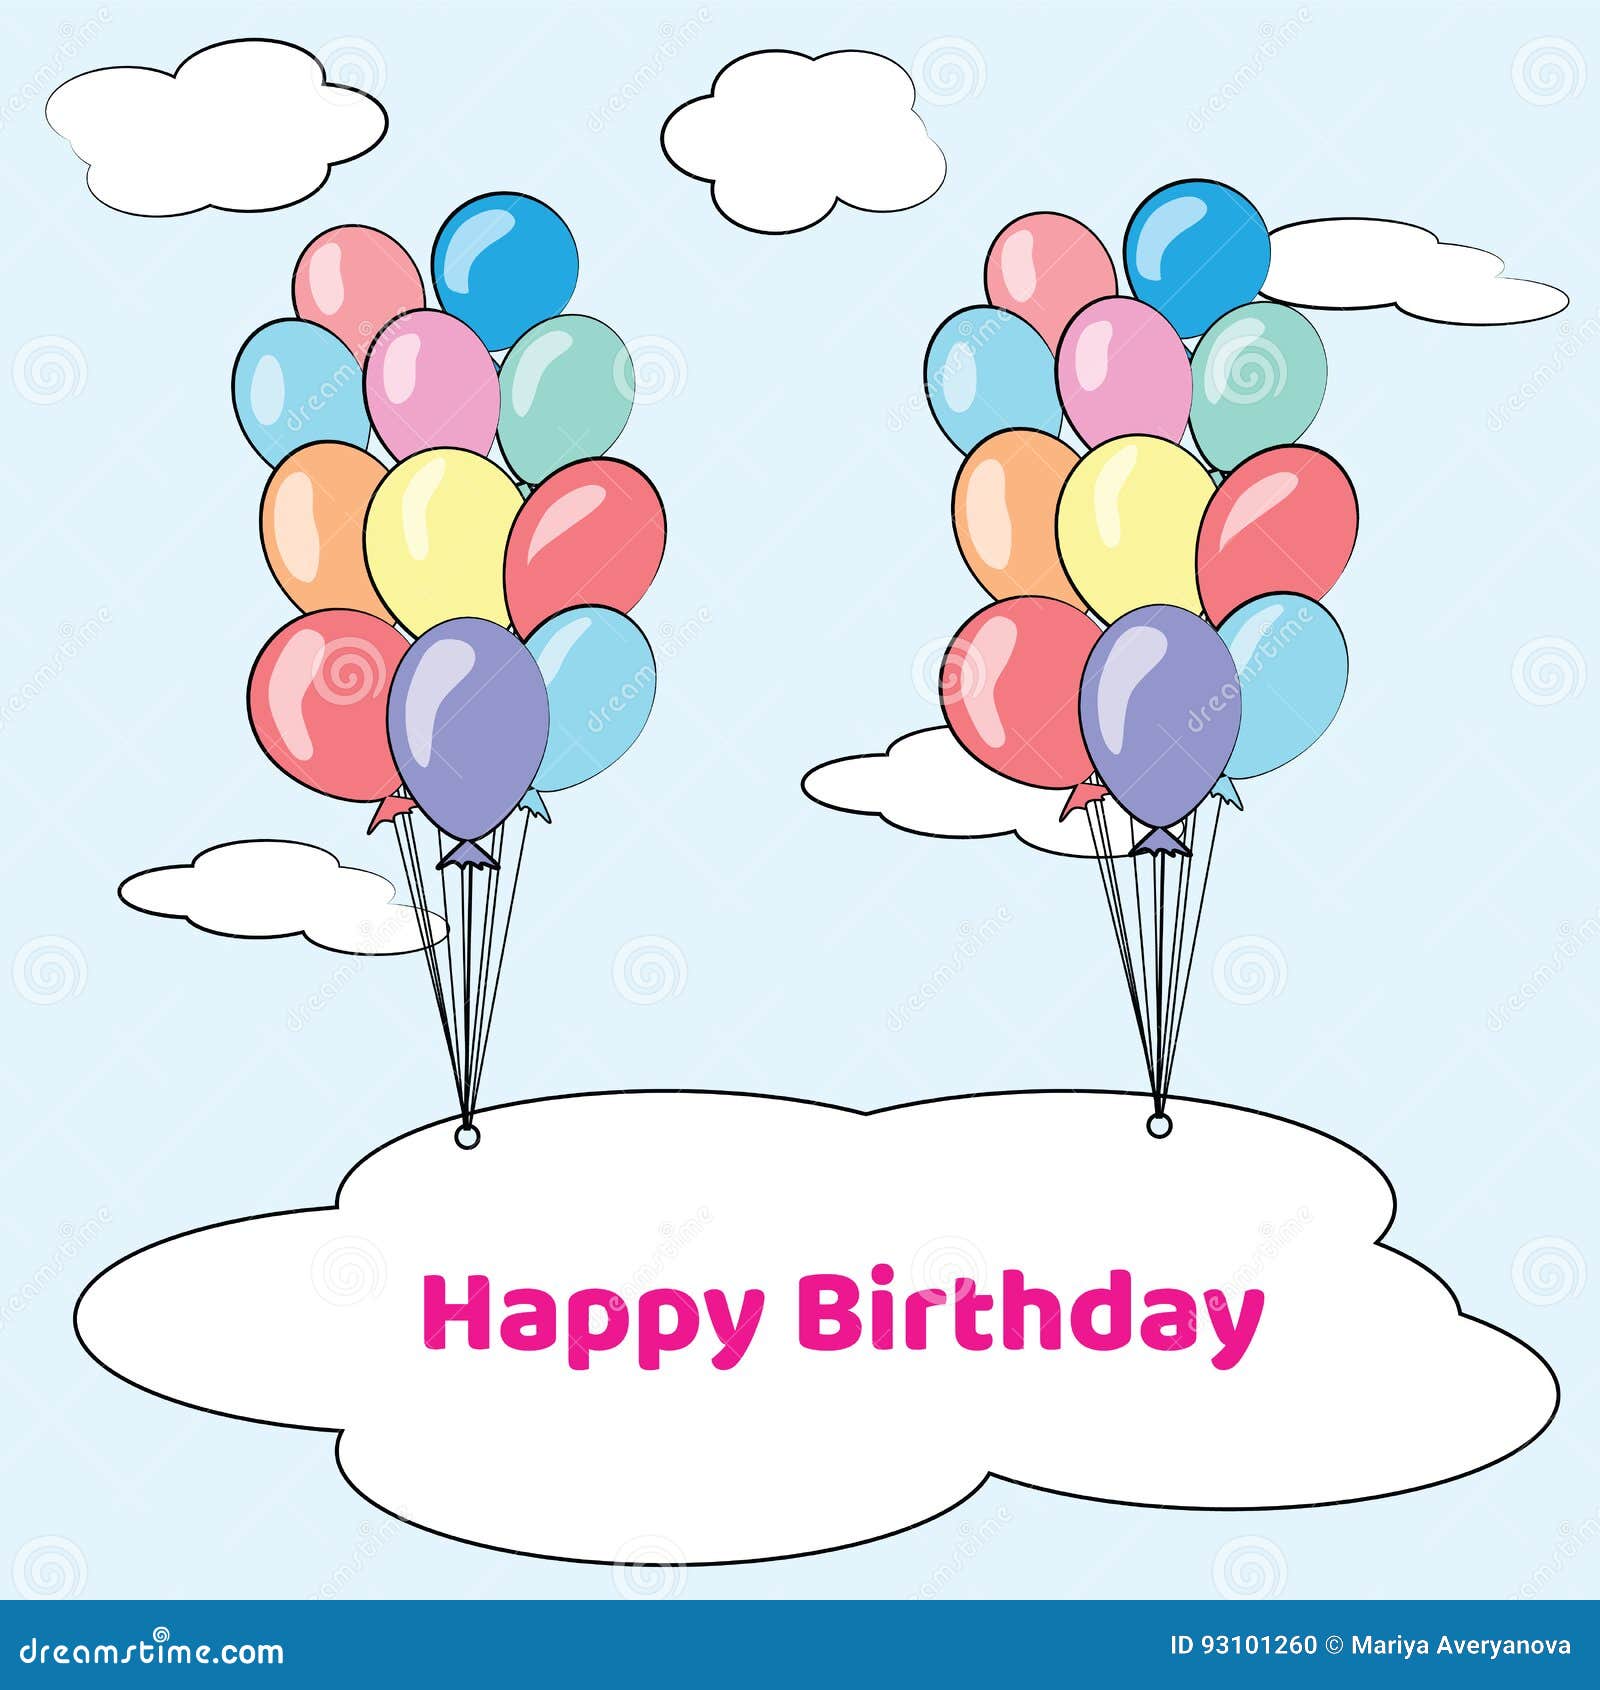 Happy Birthday Card with Balloons Stock Vector - Illustration of happy ...